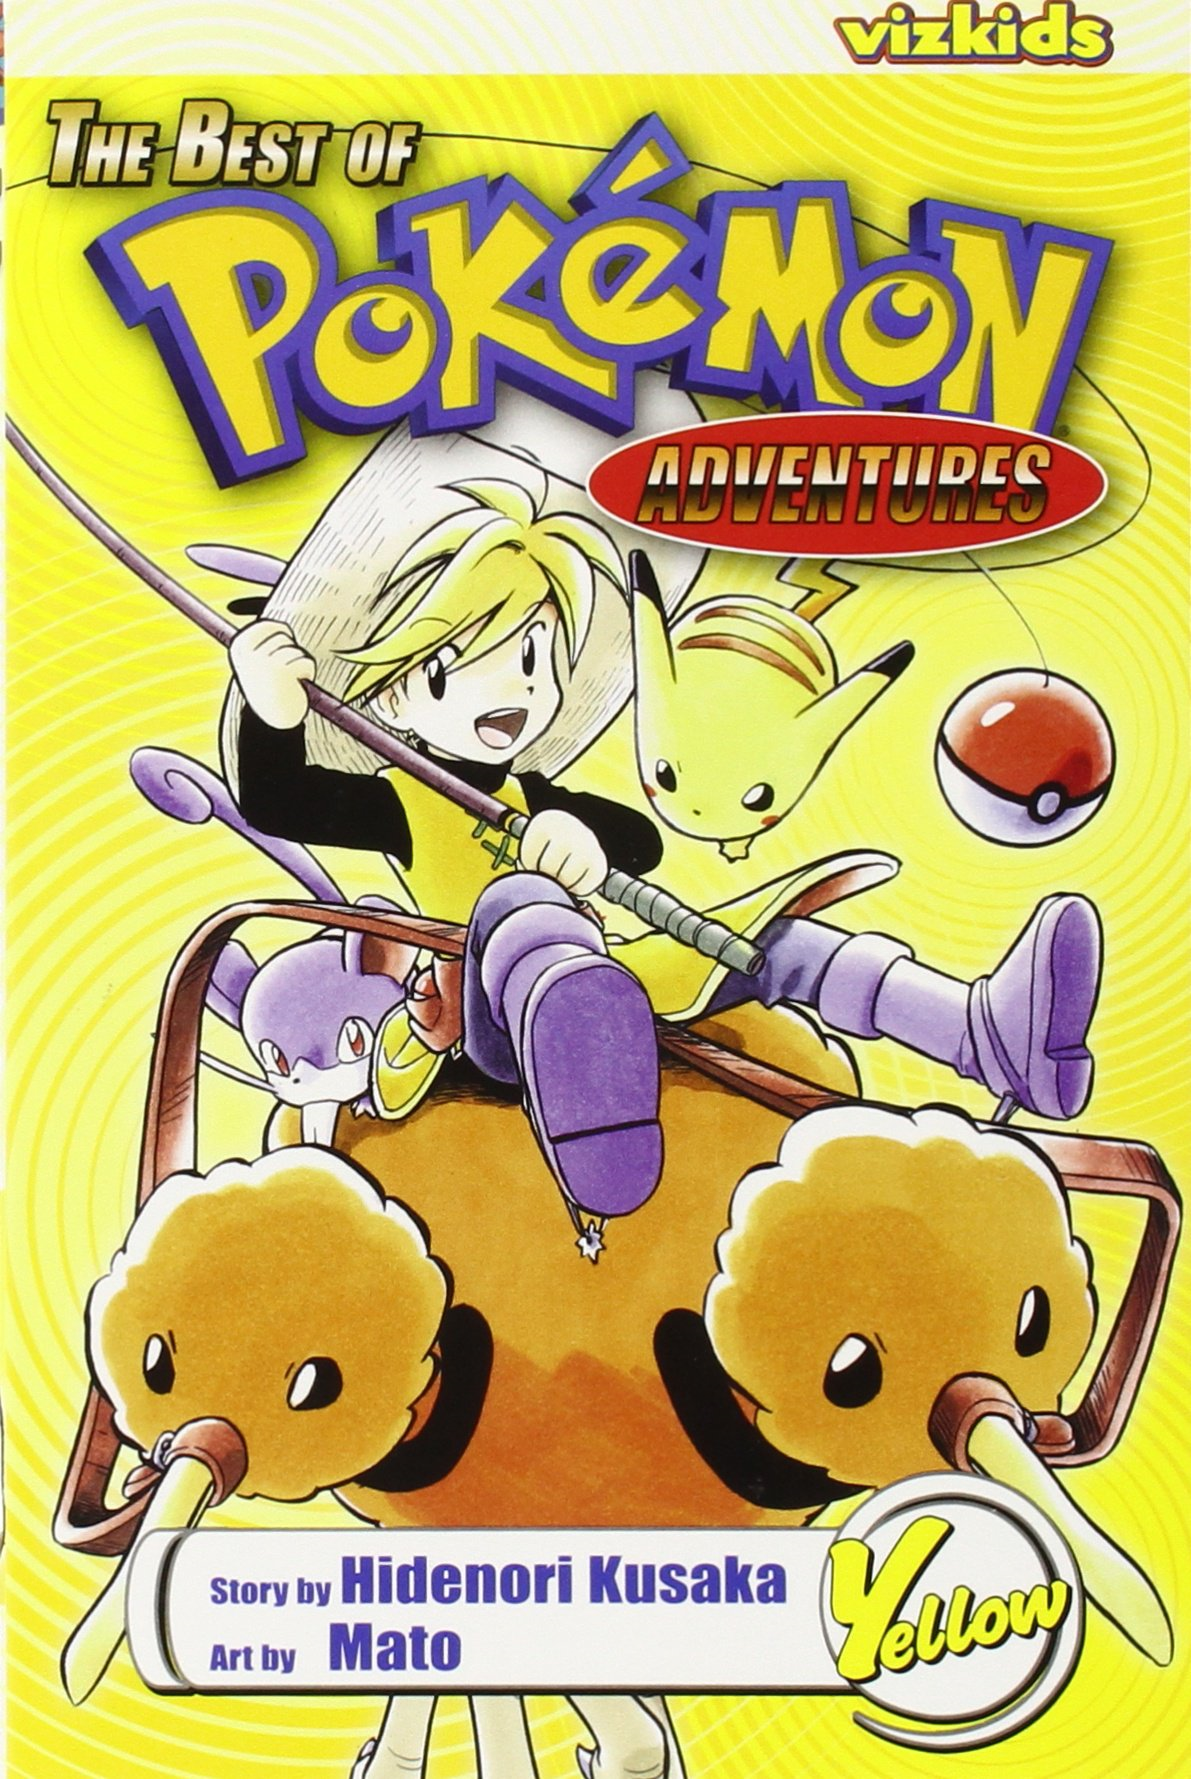 Pokémon Adventures (Red and Blue), Vol. 6, Book by Hidenori Kusaka, Mato, Official Publisher Page